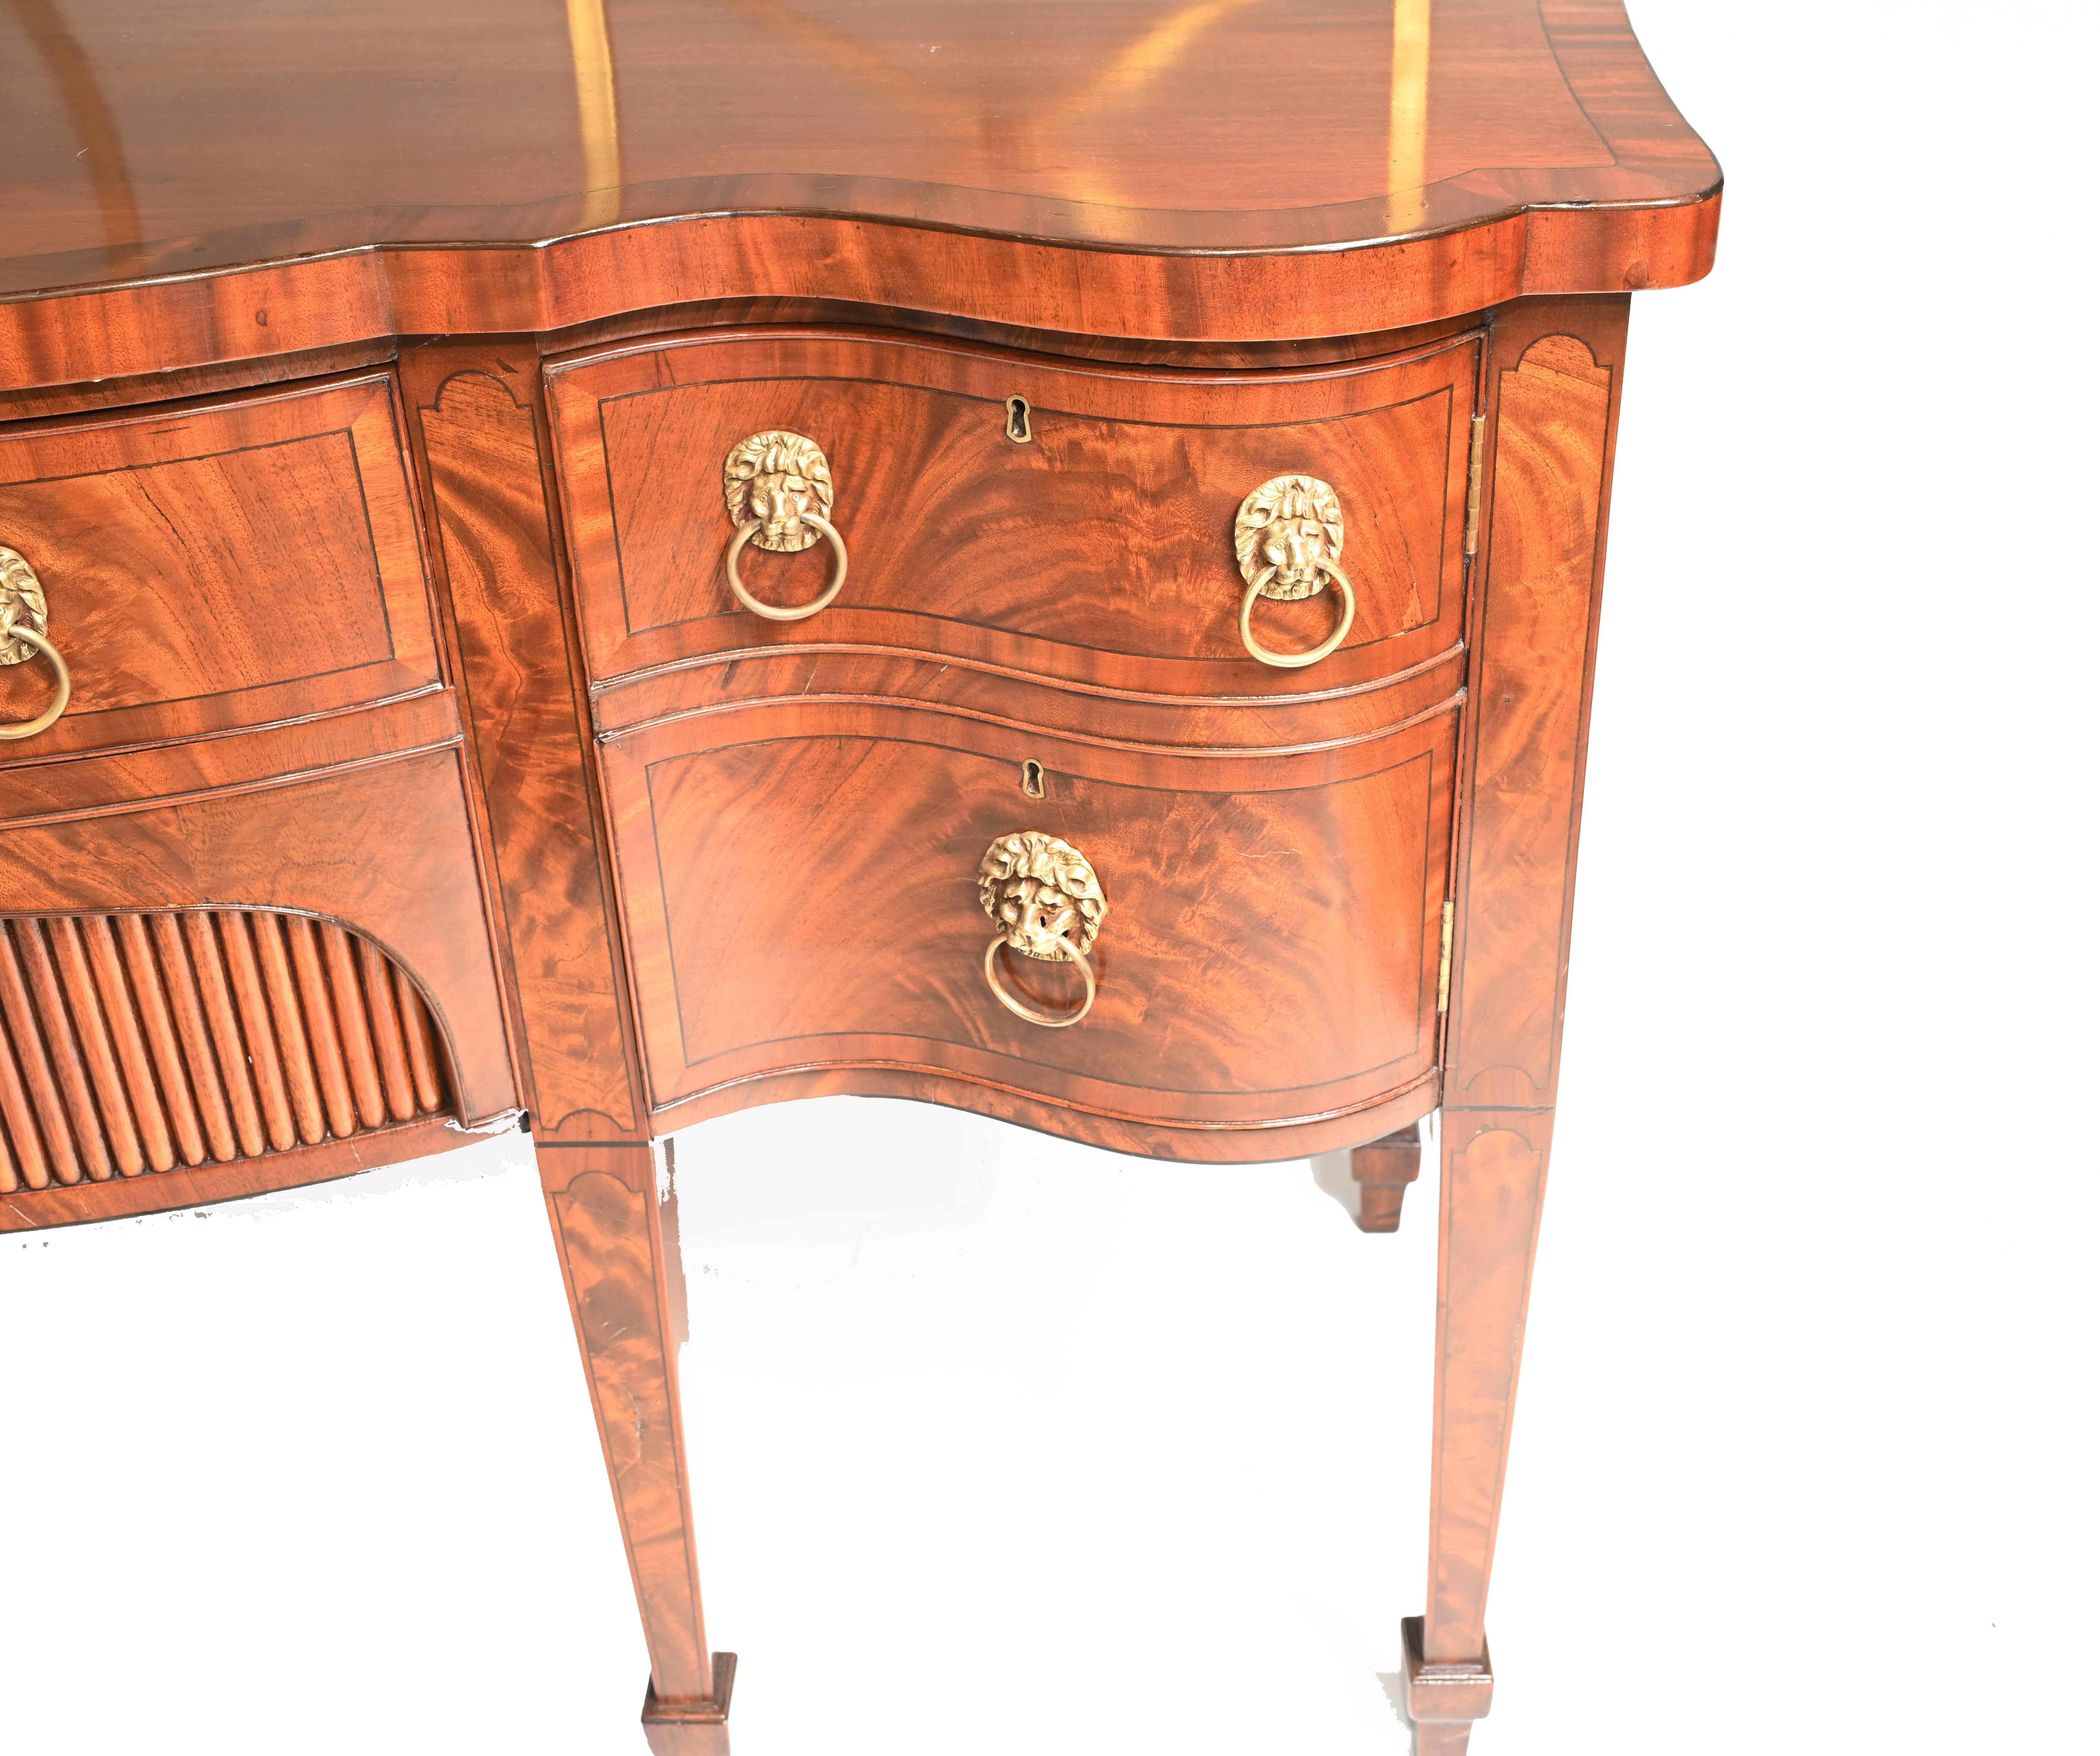 Georgian Sideboard Mahogany Server Brass Gallery 1880 In Good Condition For Sale In Potters Bar, GB